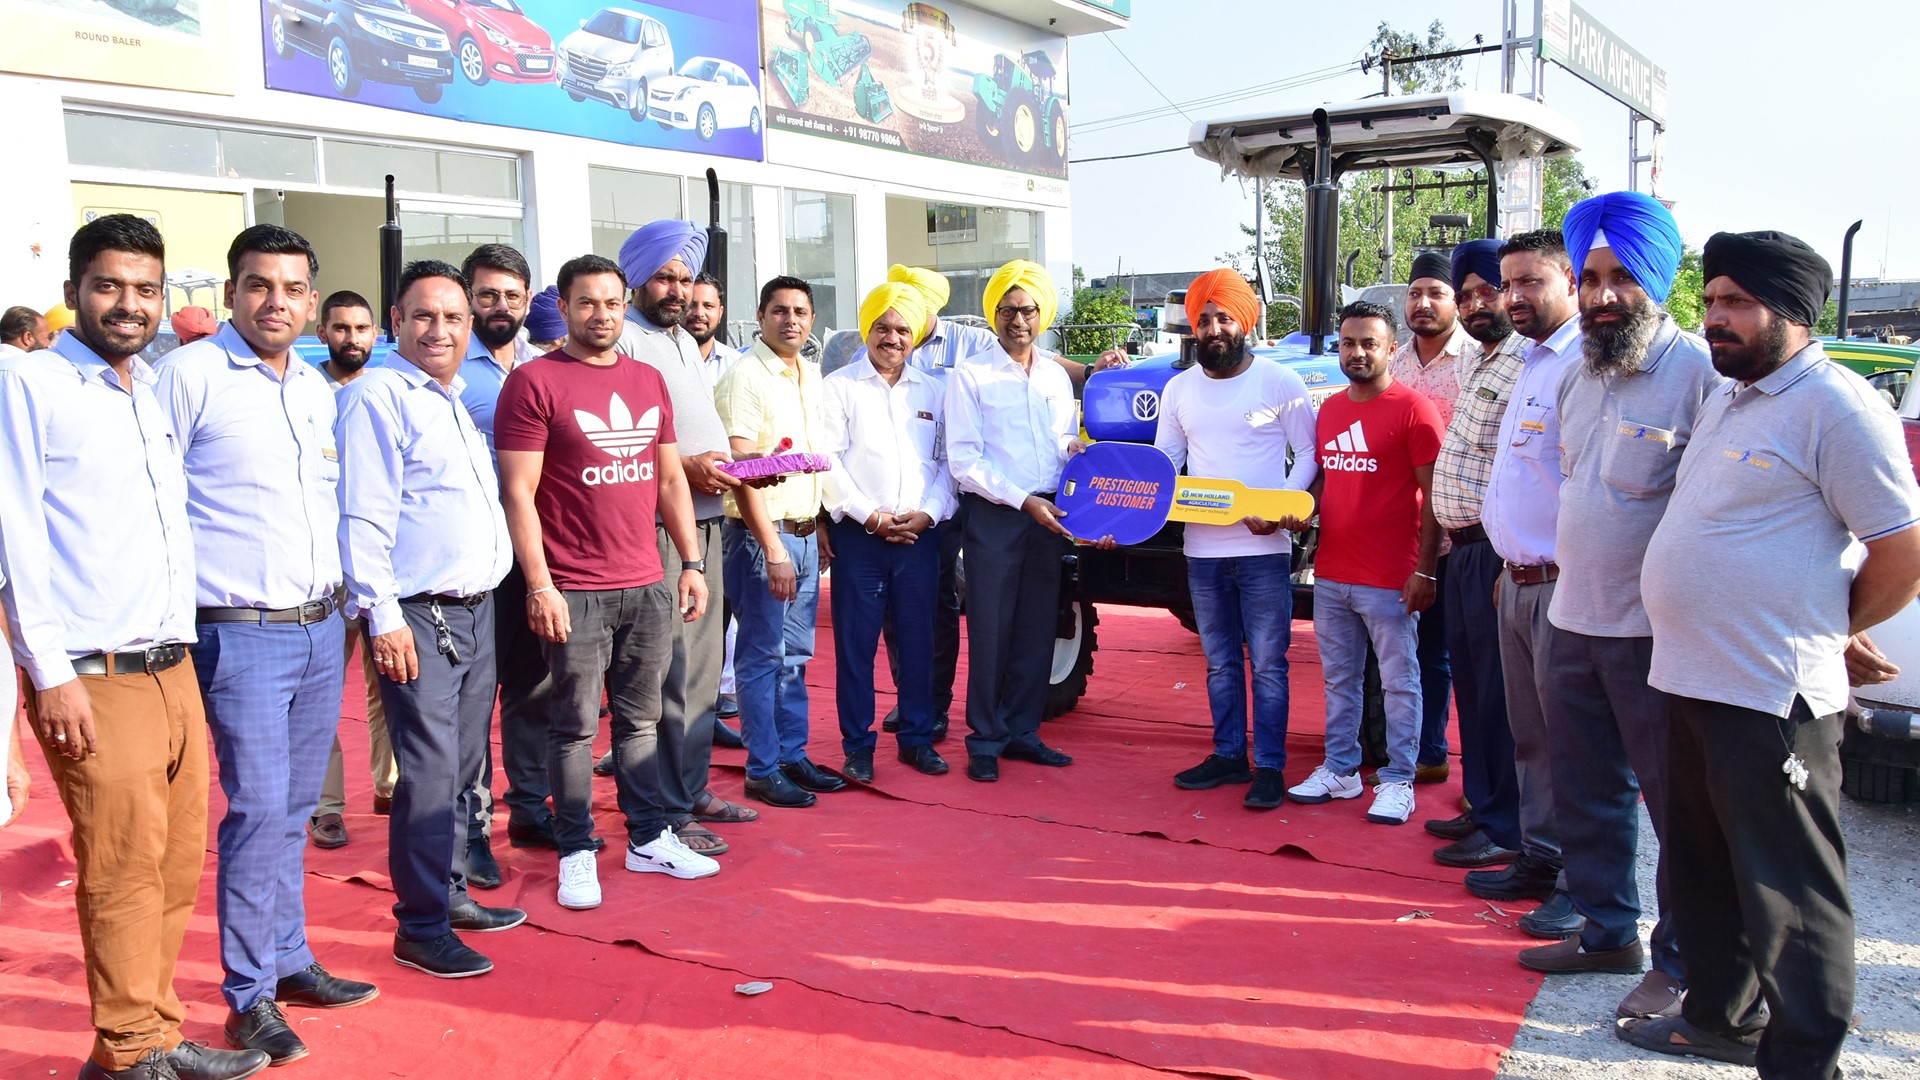 New Holland Agriculture Customer Event at M/s Kaler Agrotech, Amritsar